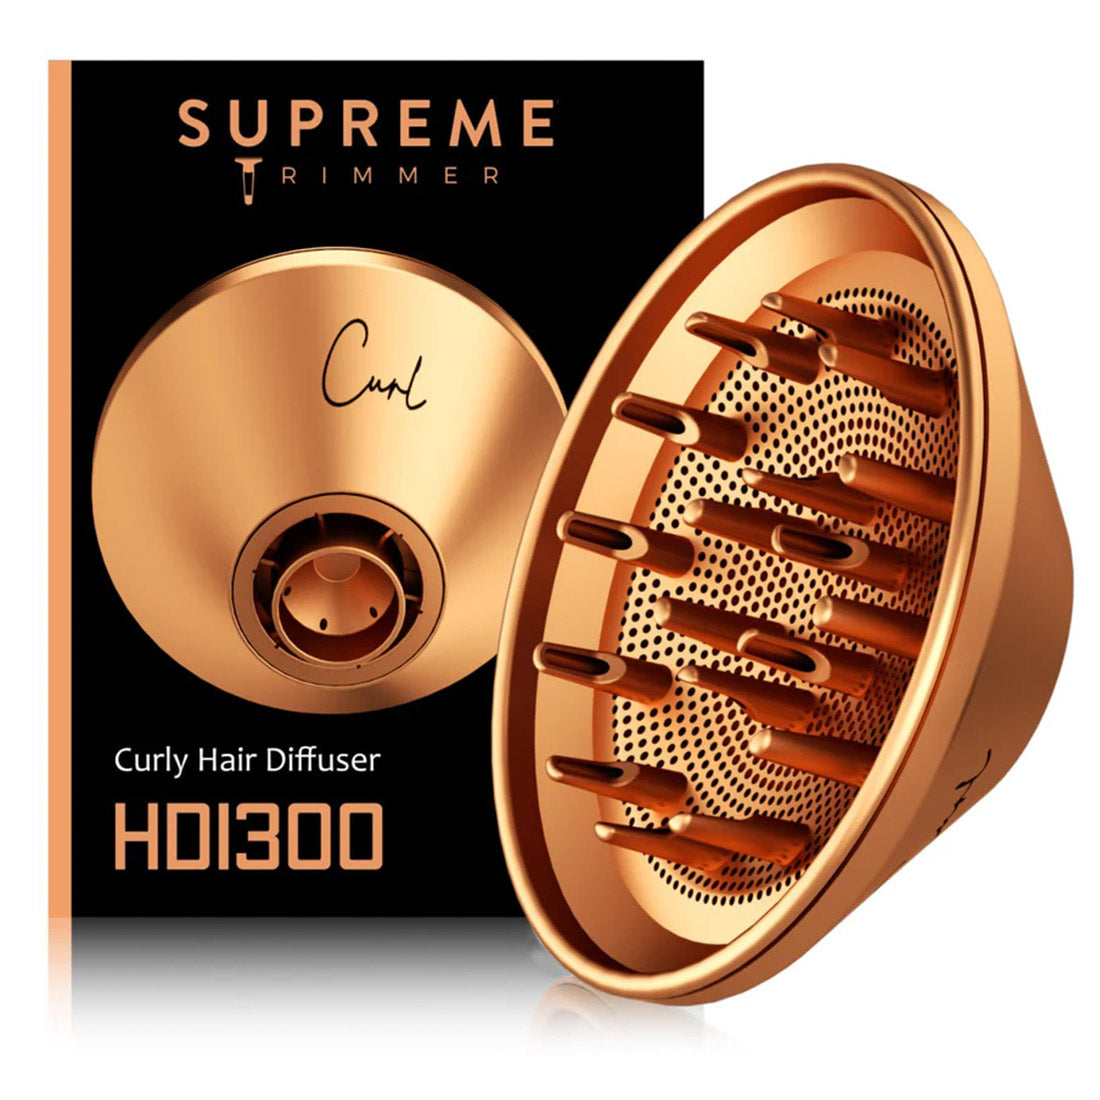 Supreme Trimmer - Curly Hair Diffuser - HDI300